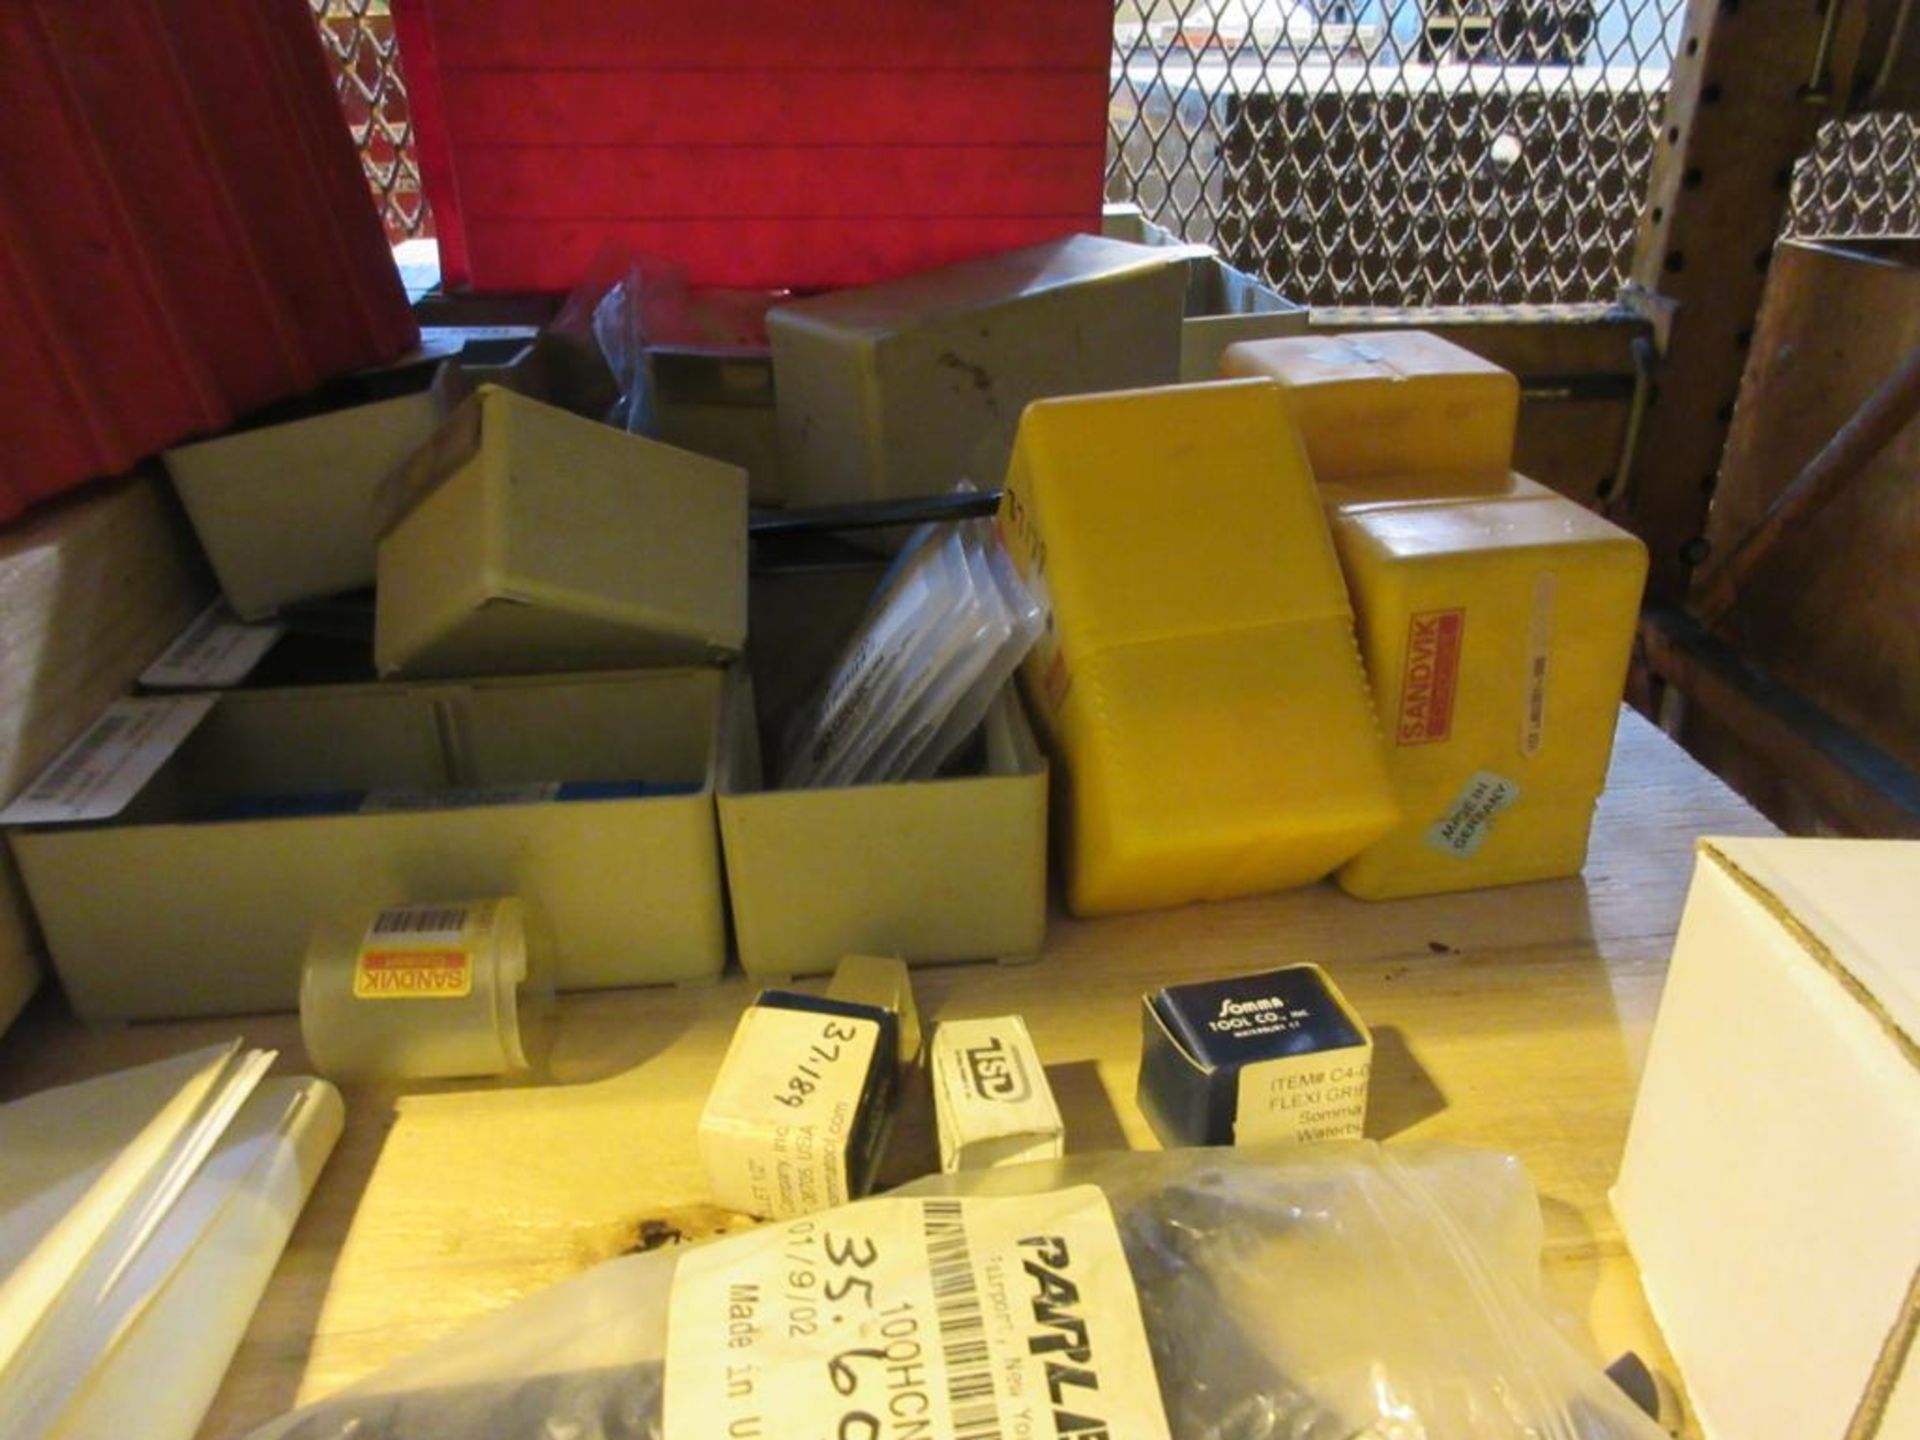 CONTENTS OF (22) SECTIONS PALLET RACK: ASSORTED ABRASIVES, SUNNEN STONES, TOOL BITS, DOVETAIL CUTTER - Image 43 of 43